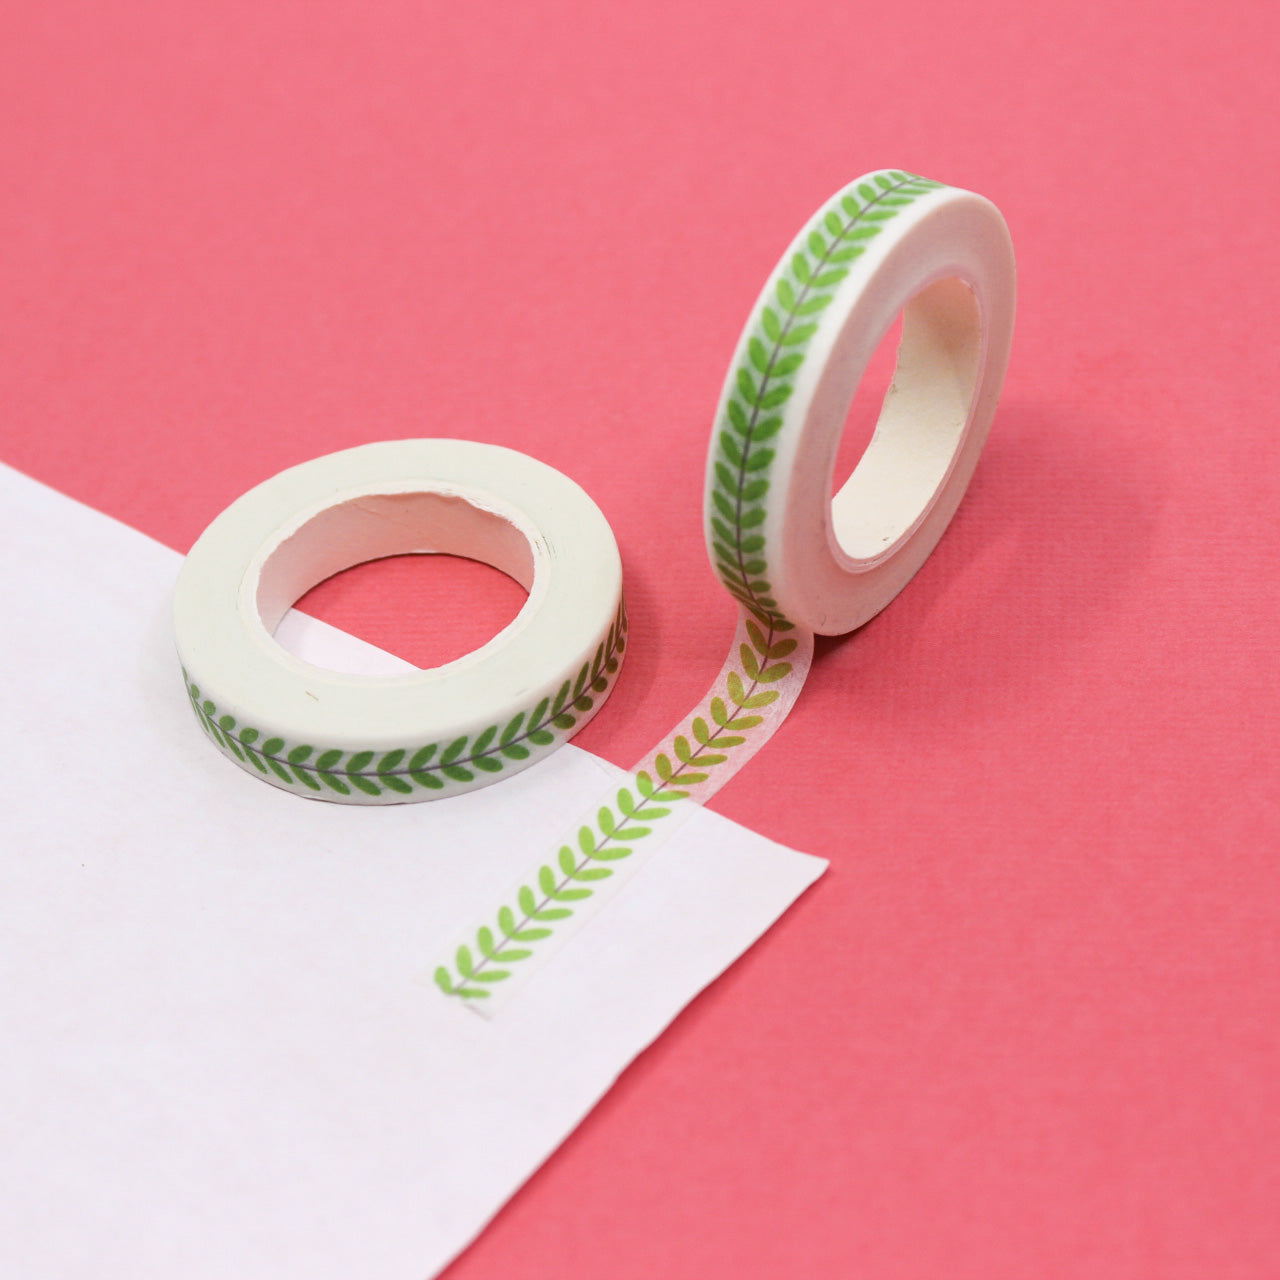 Embrace the beauty of nature with our Narrow Green Vine Washi Tape, featuring delicate vine and leaf patterns in a lush green hue. Ideal for adding a touch of botanical charm to your crafts. This tape is sold at BBB Supplies Craft Shop.